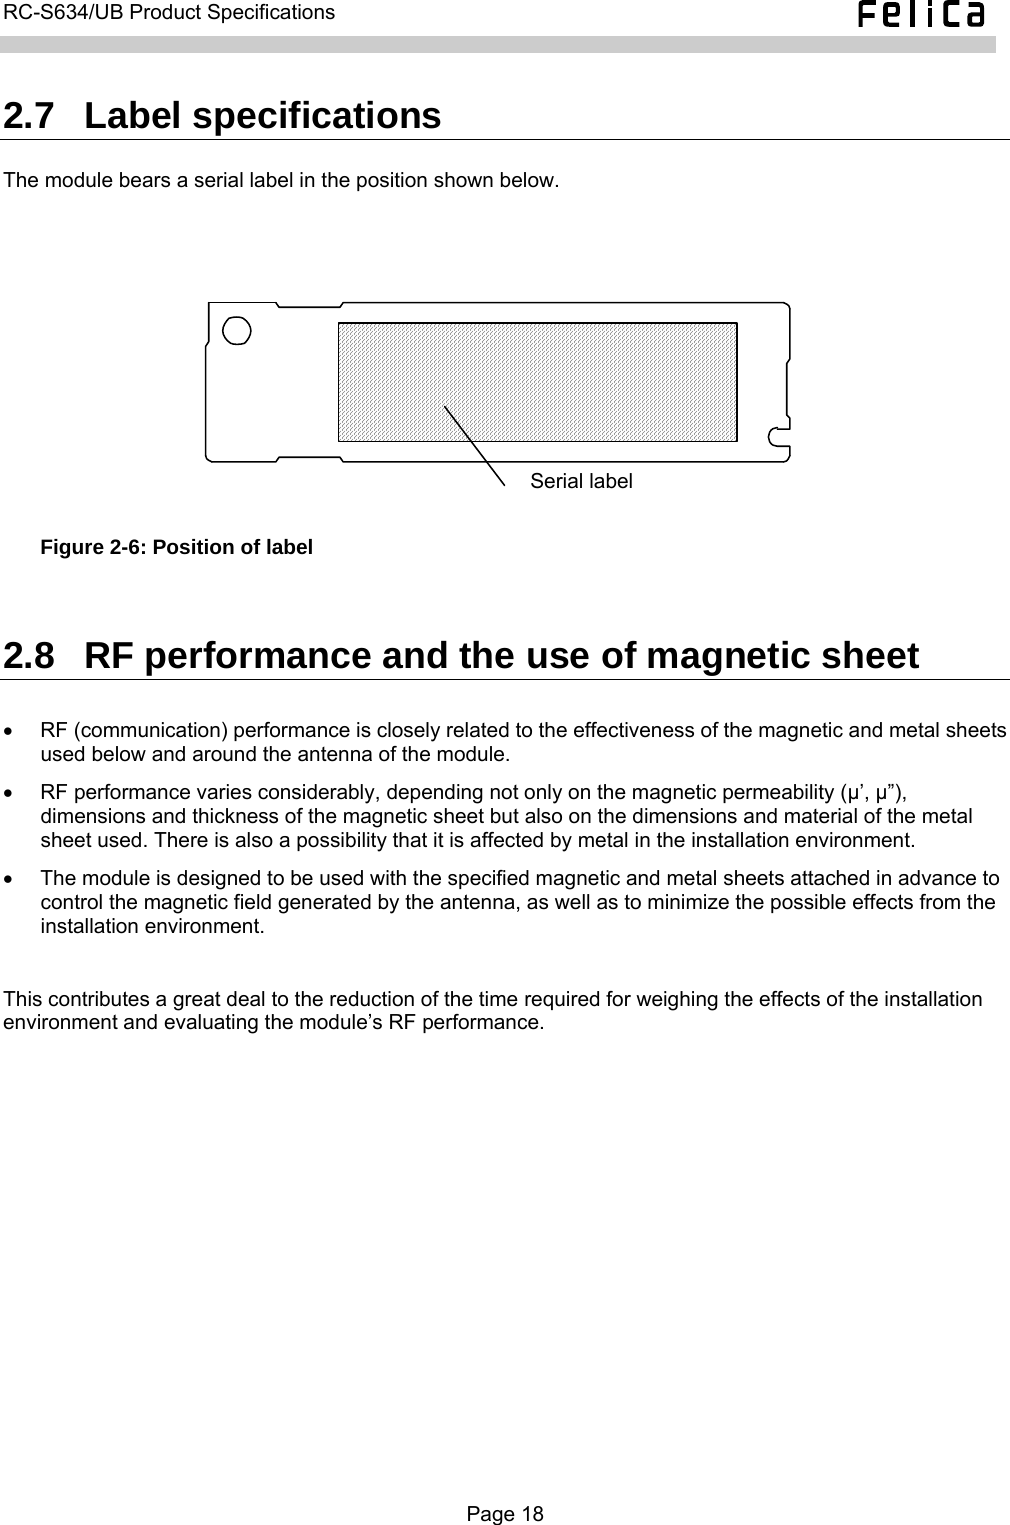   RC-S634/UB Product Specifications  2.7  Label specifications The module bears a serial label in the position shown below.  Serial label  Figure 2-6: Position of label  2.8  RF performance and the use of magnetic sheet •  RF (communication) performance is closely related to the effectiveness of the magnetic and metal sheets used below and around the antenna of the module. •  RF performance varies considerably, depending not only on the magnetic permeability (μ’, μ”), dimensions and thickness of the magnetic sheet but also on the dimensions and material of the metal sheet used. There is also a possibility that it is affected by metal in the installation environment. •  The module is designed to be used with the specified magnetic and metal sheets attached in advance to control the magnetic field generated by the antenna, as well as to minimize the possible effects from the installation environment.  This contributes a great deal to the reduction of the time required for weighing the effects of the installation environment and evaluating the module’s RF performance.  Page 18  